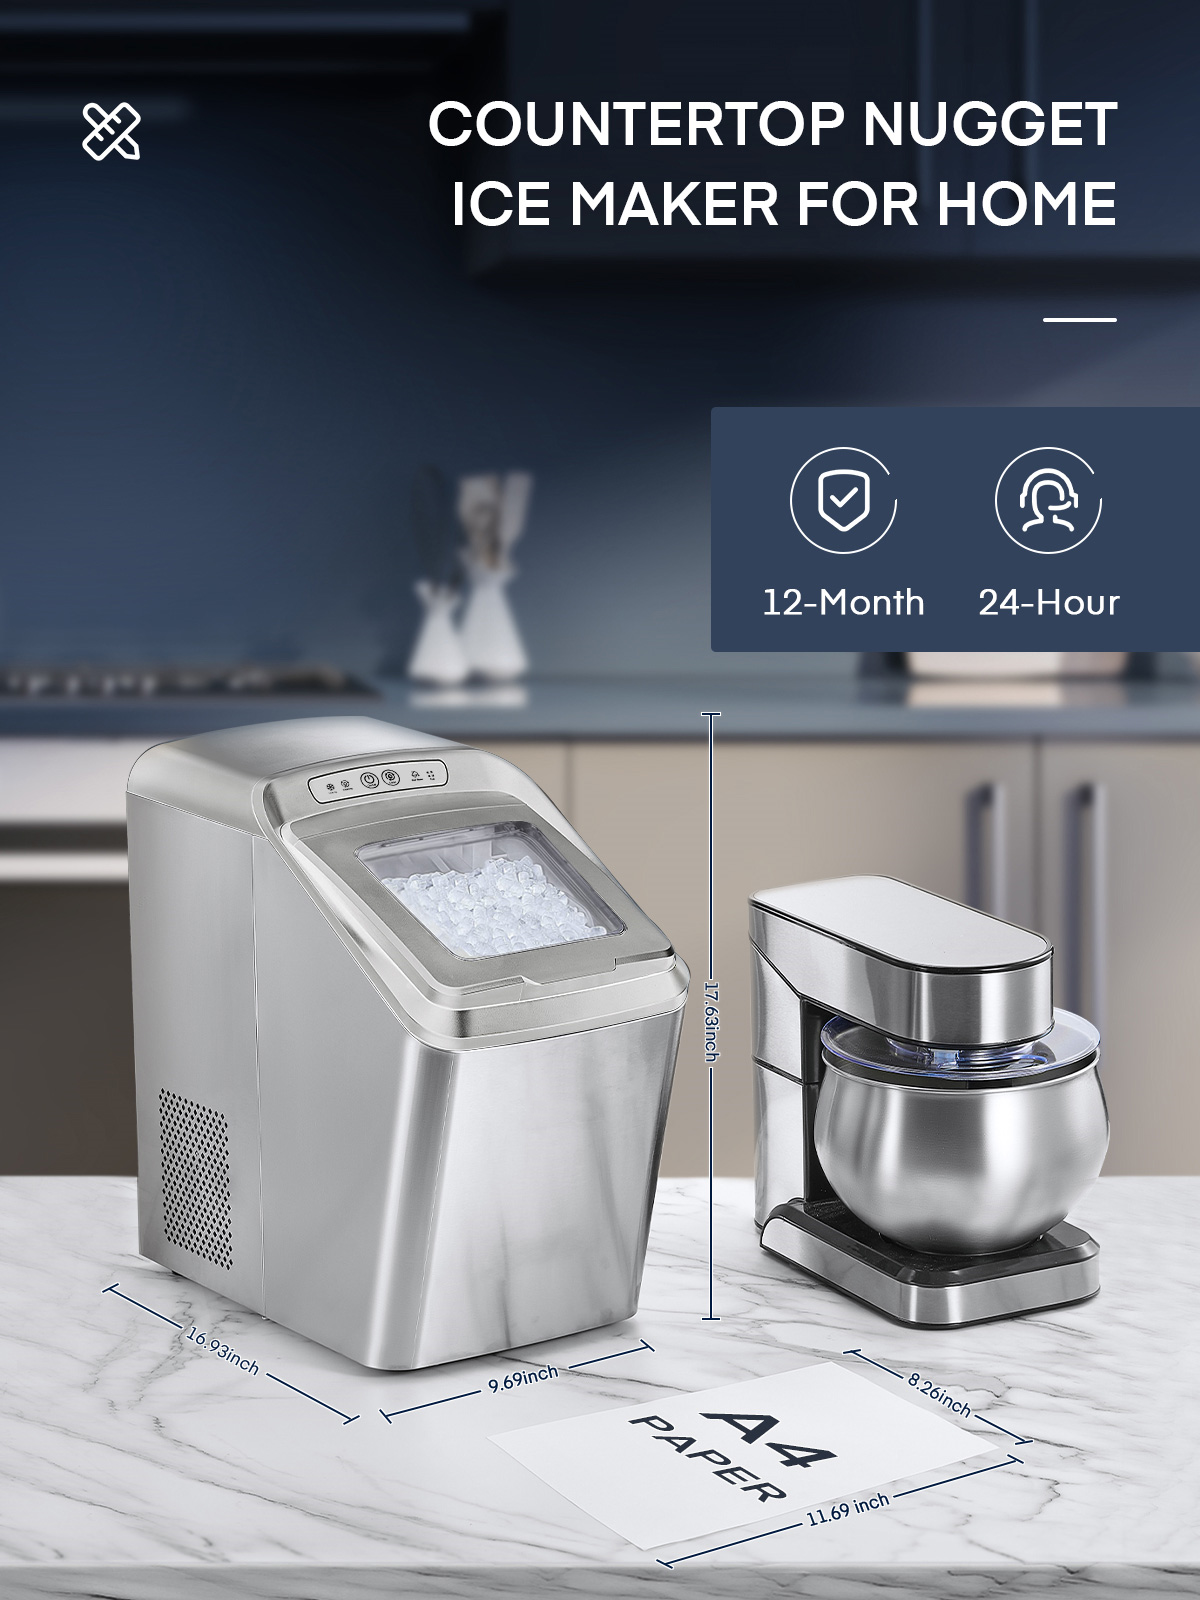 FOHERE Nugget Ice Maker Countertop, 30Lbs Pebble Pellet Ice per Day, Self-Clean, Stainless Steel, White